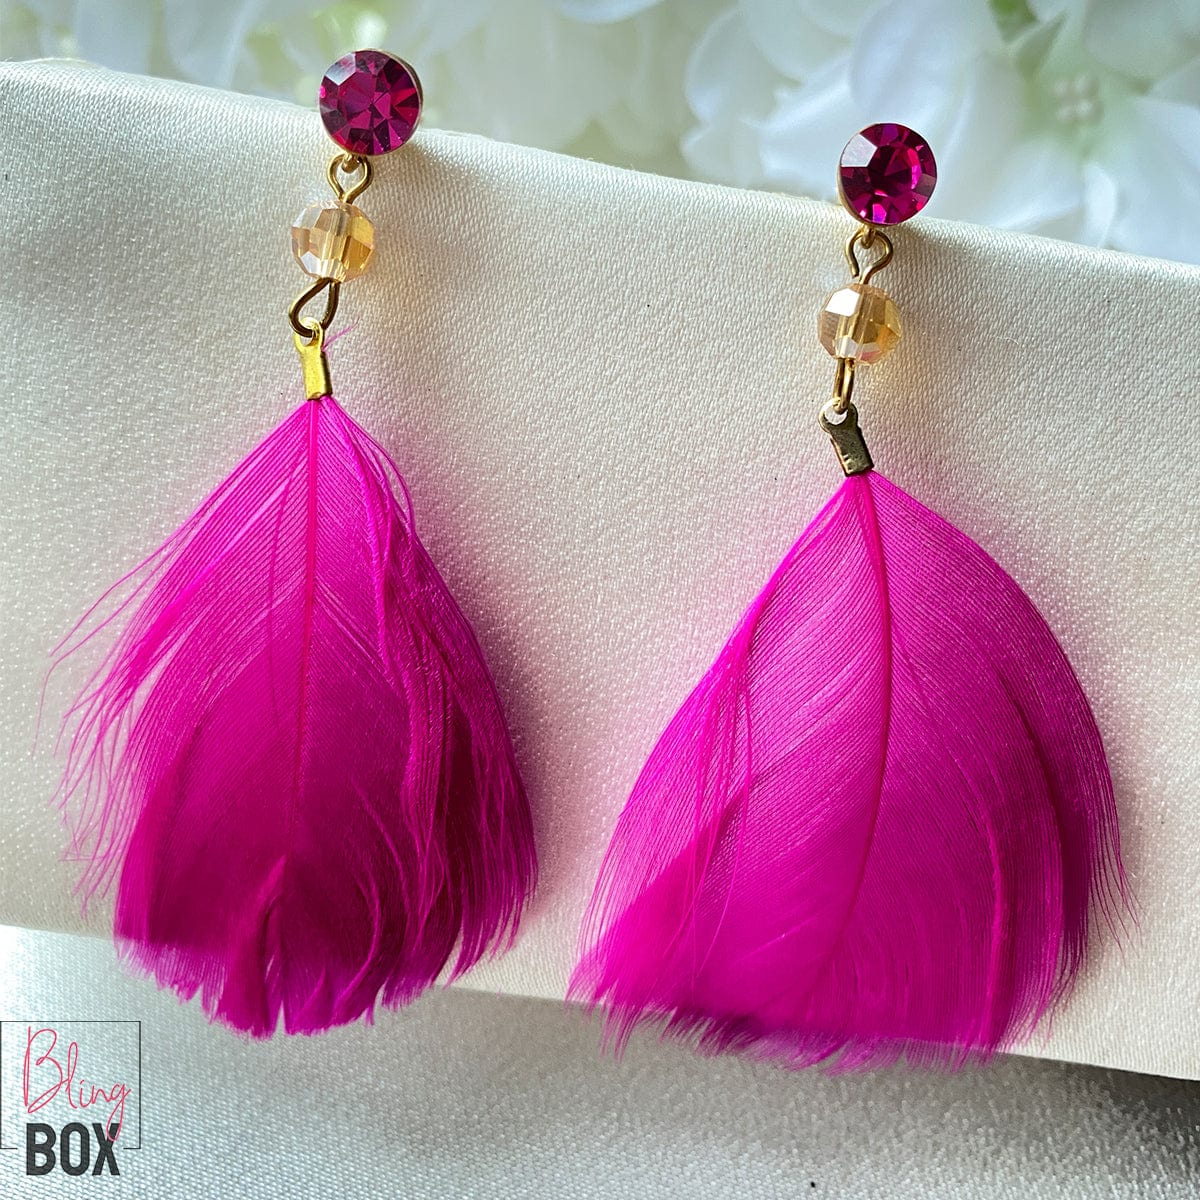 DIY Feather Earrings for Making a Statement | ctrl + curate